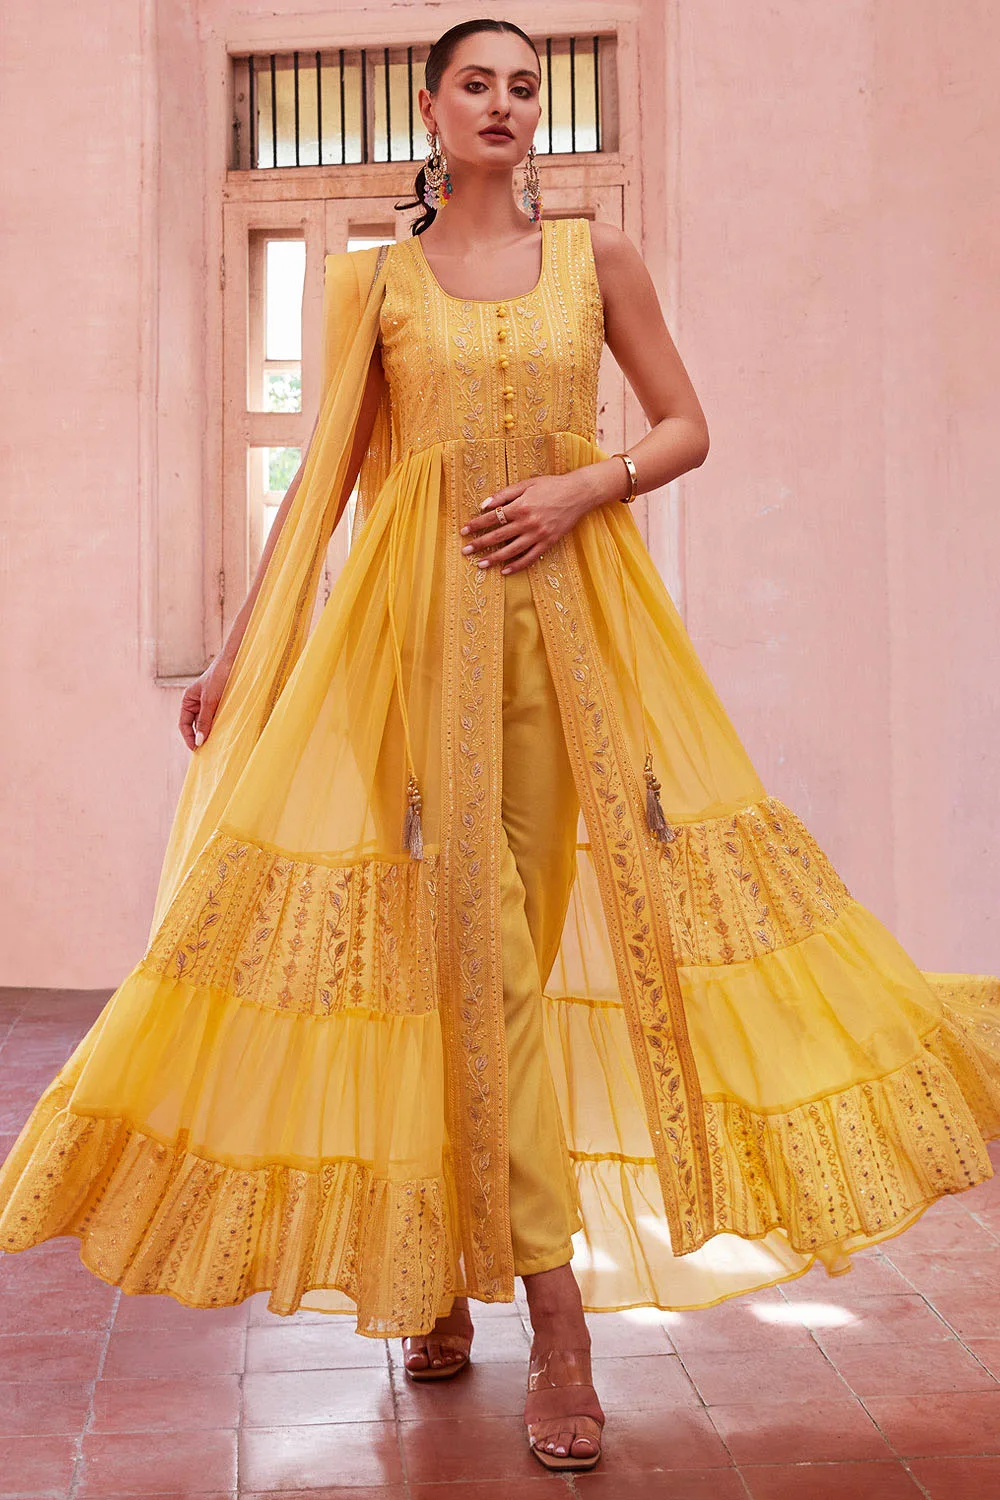 Charming Yellow Indo-Western Anarkali Suit for Mehendi with Intricate Embroidery and Soft Net Dupatta